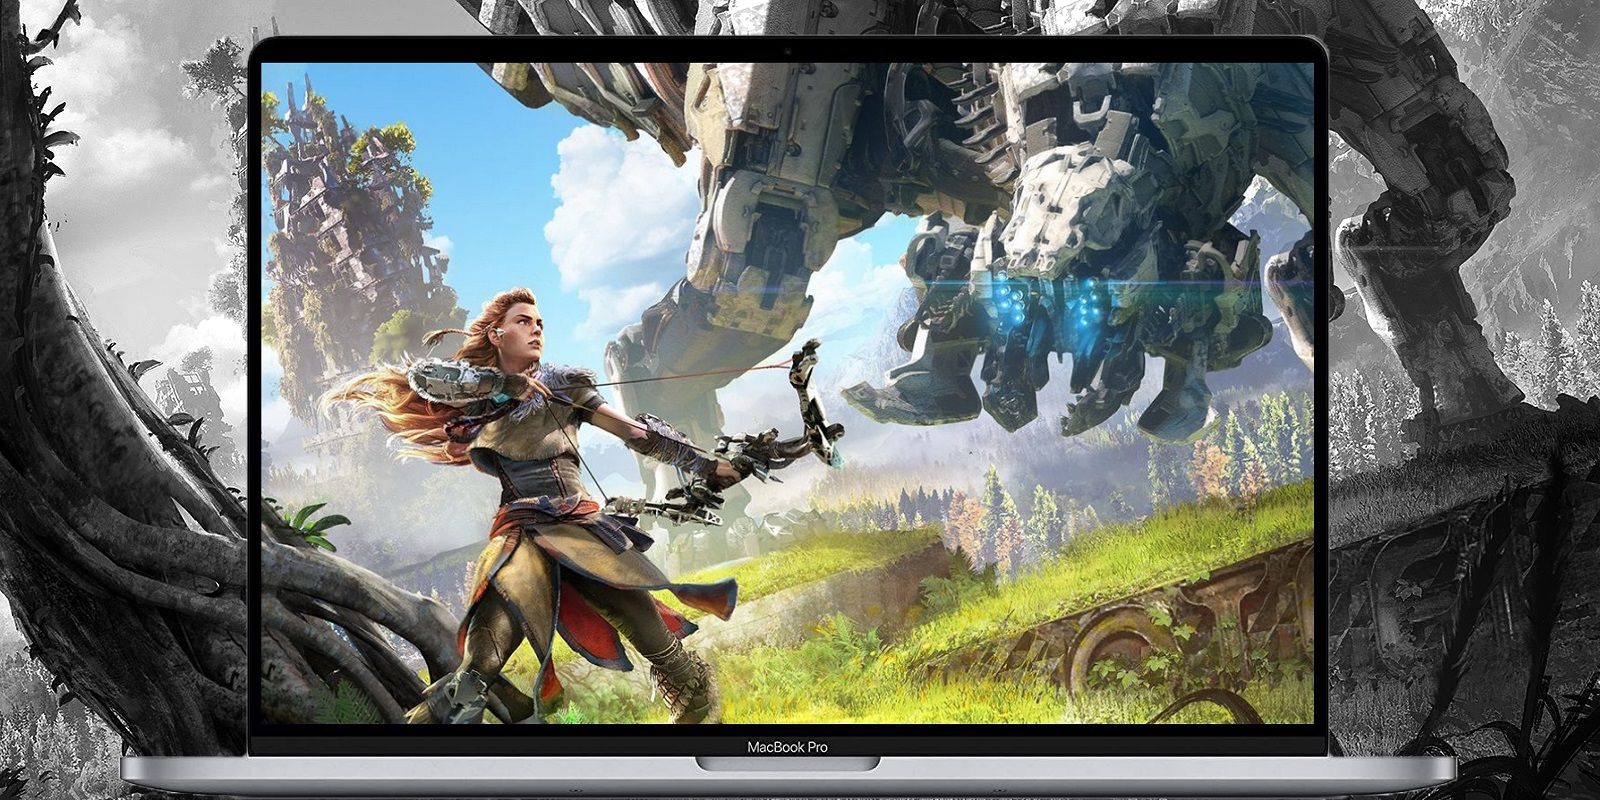 if i download windows 10 for mac will i run games better